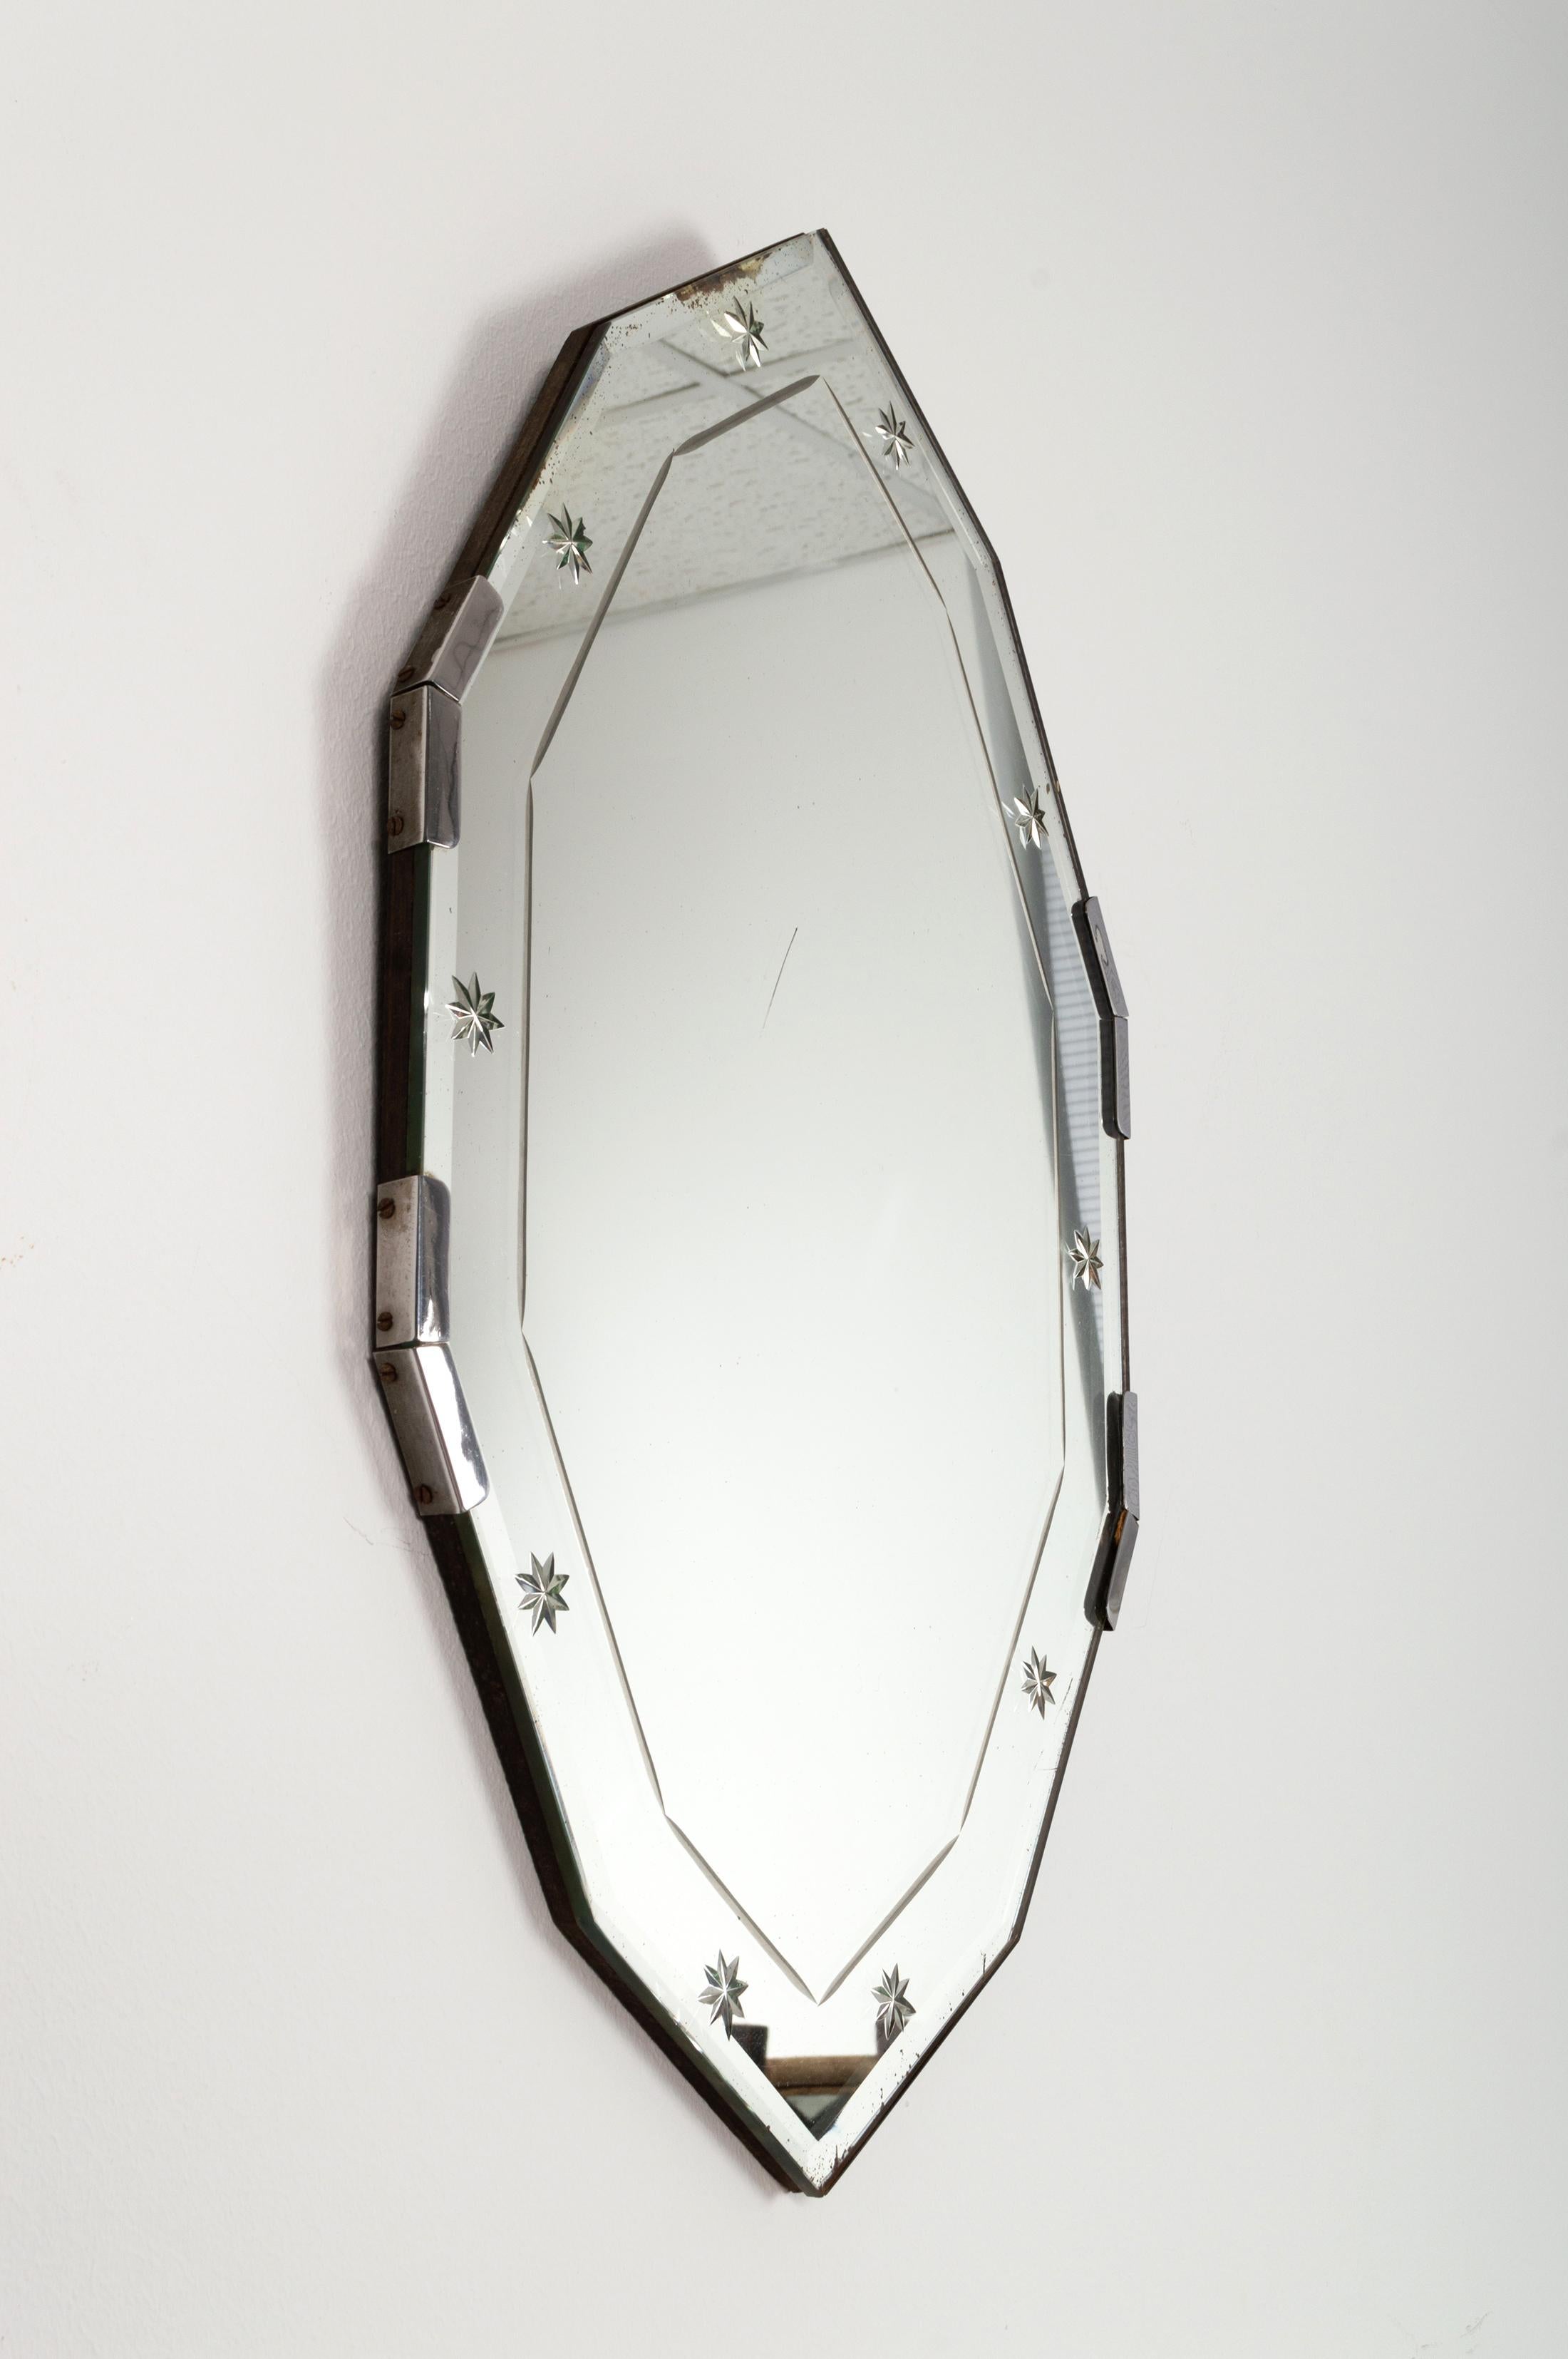 20th Century French Art Deco Etched Star Cut Glass Mirror C.1930 For Sale